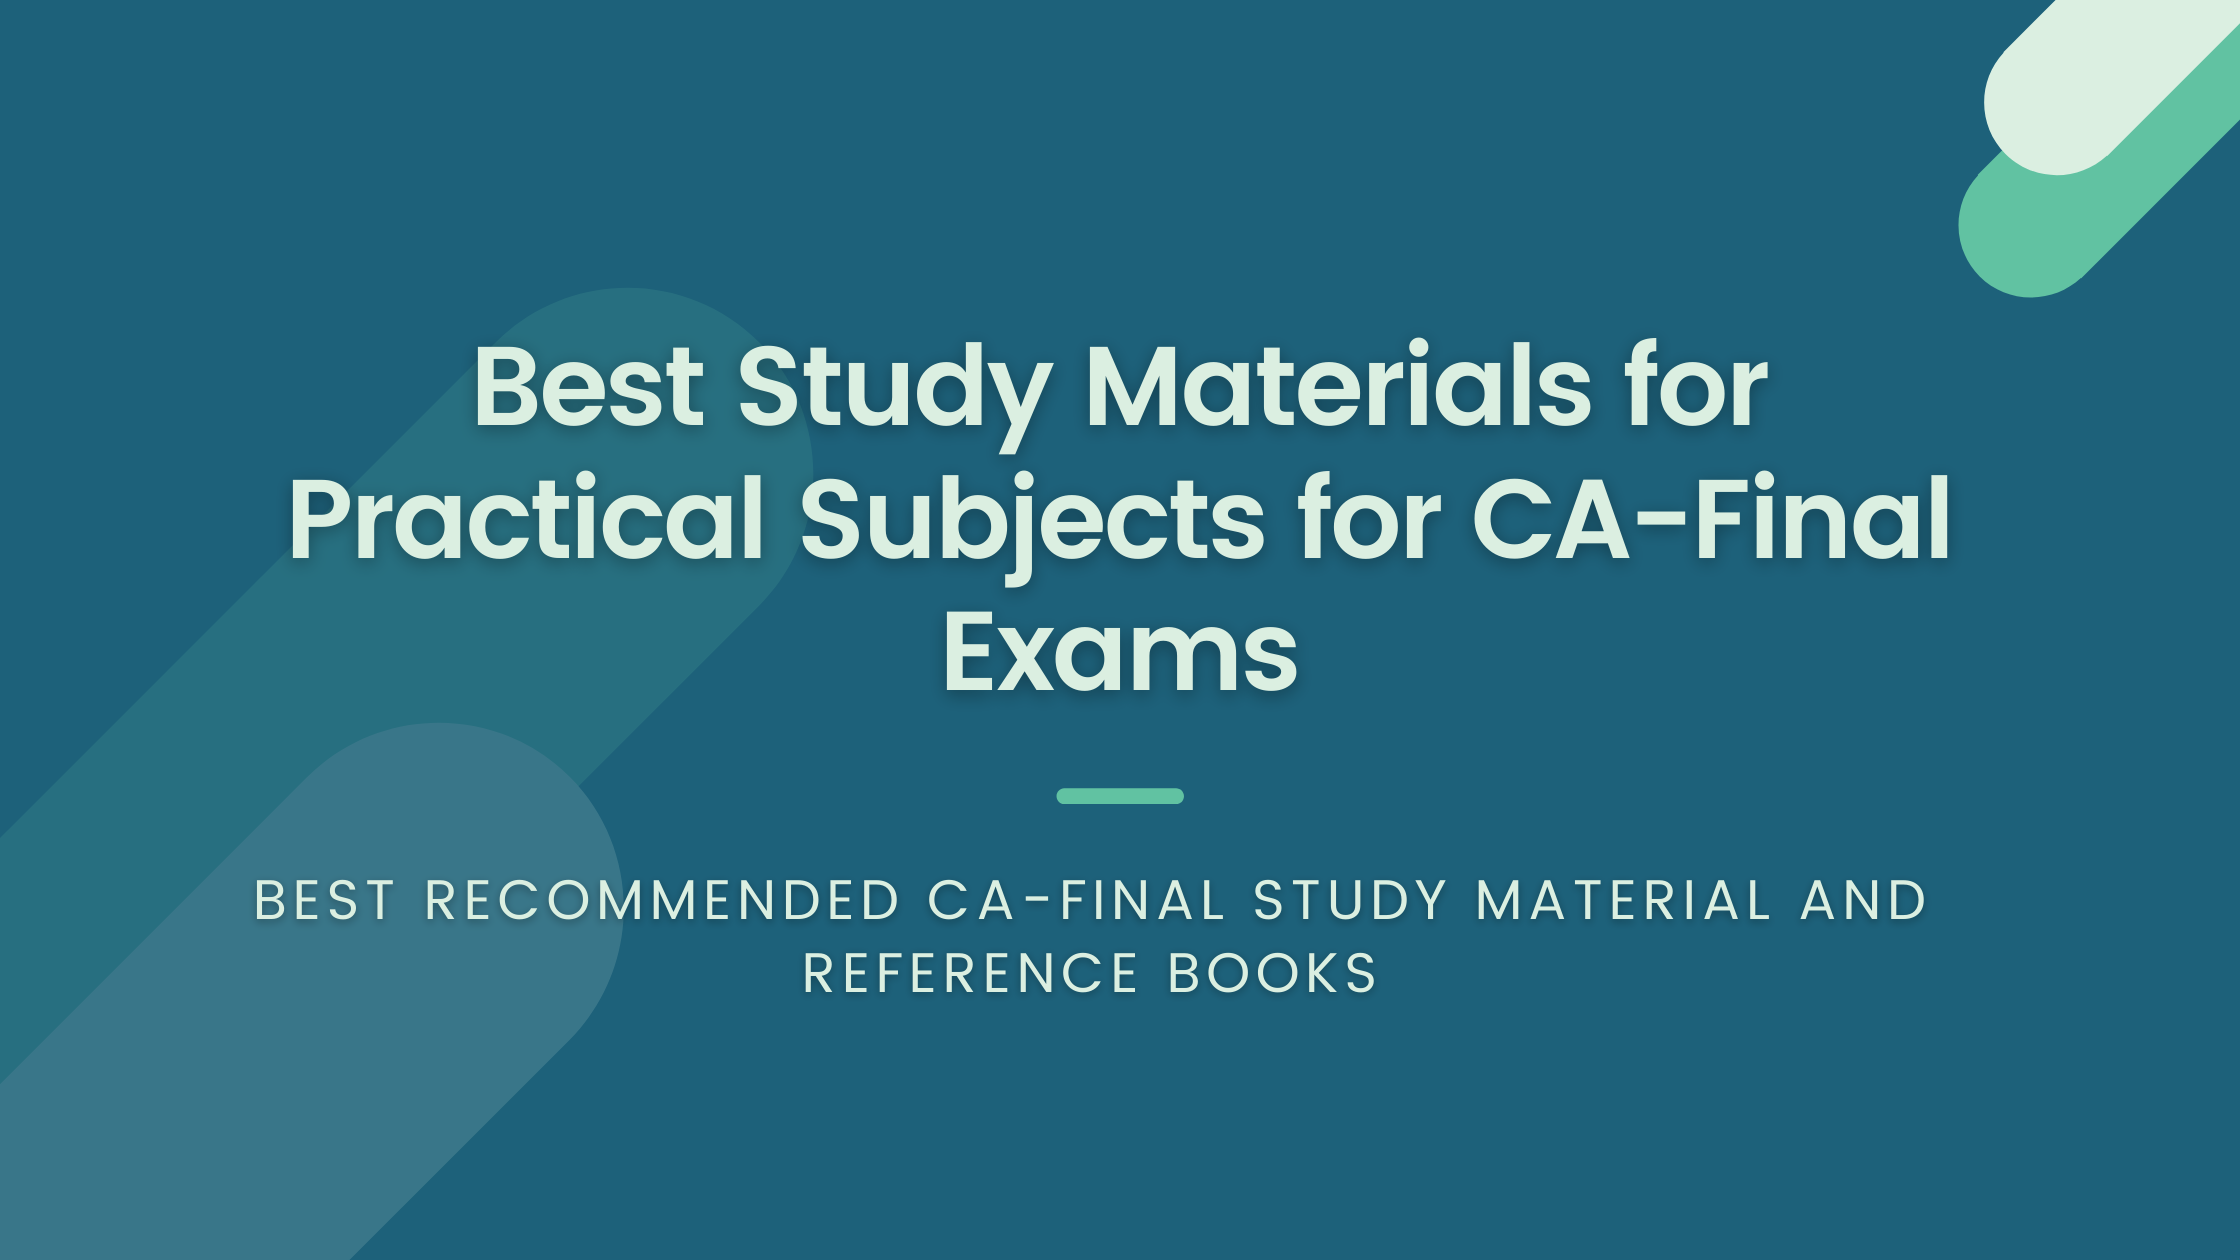 Best Study Materials for Practical Subjects for CA-Final Exams